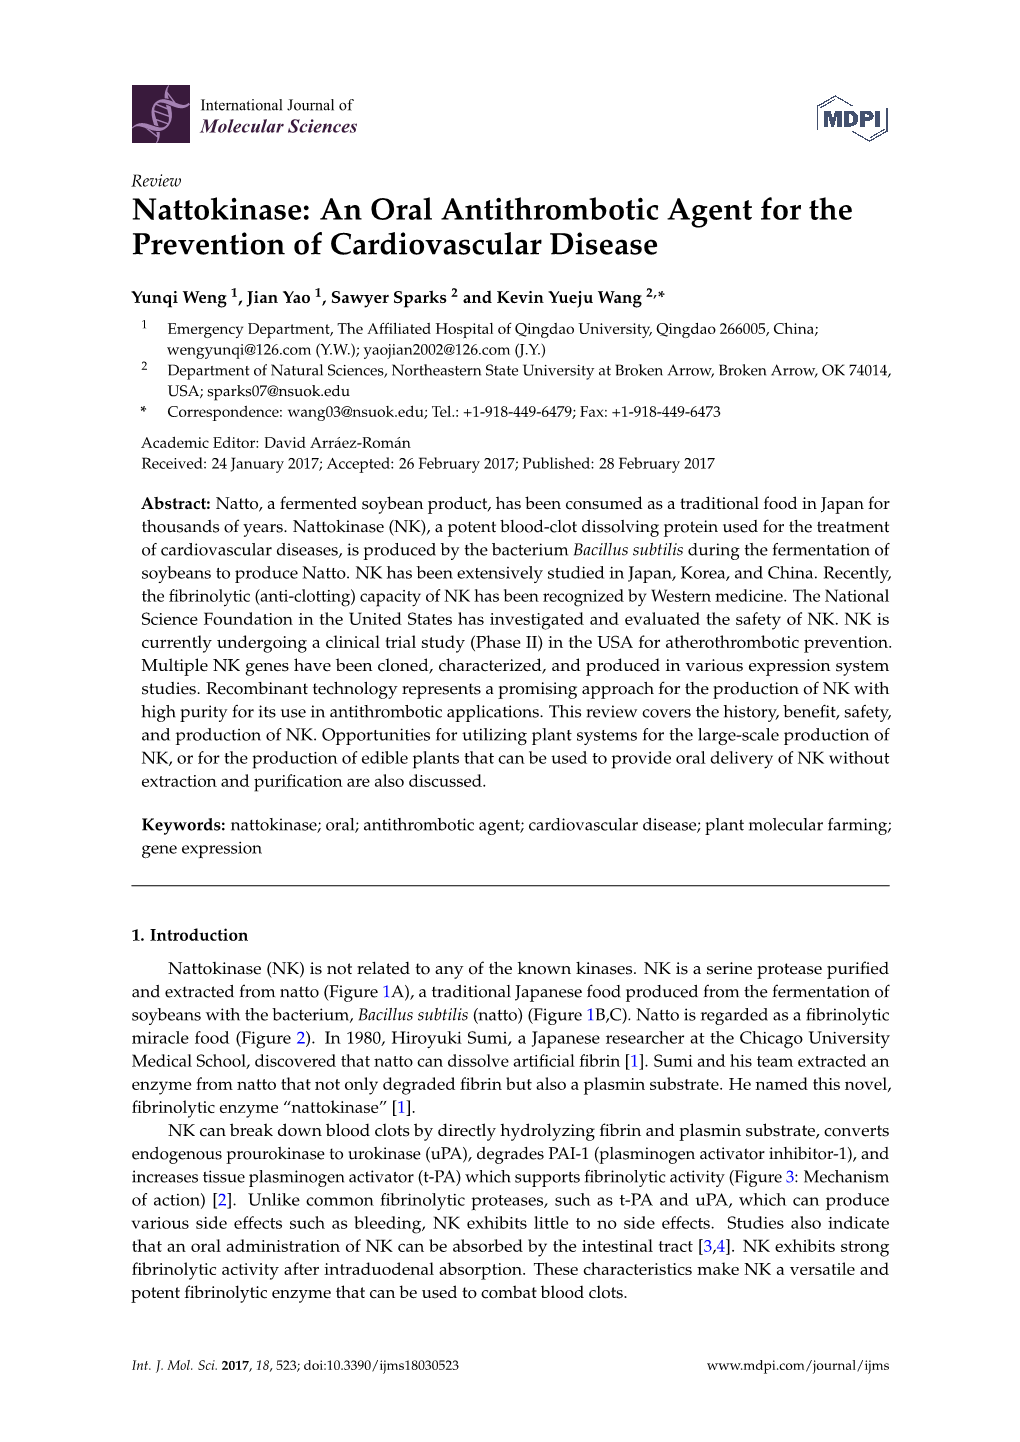 Nattokinase: an Oral Antithrombotic Agent for the Prevention of Cardiovascular Disease